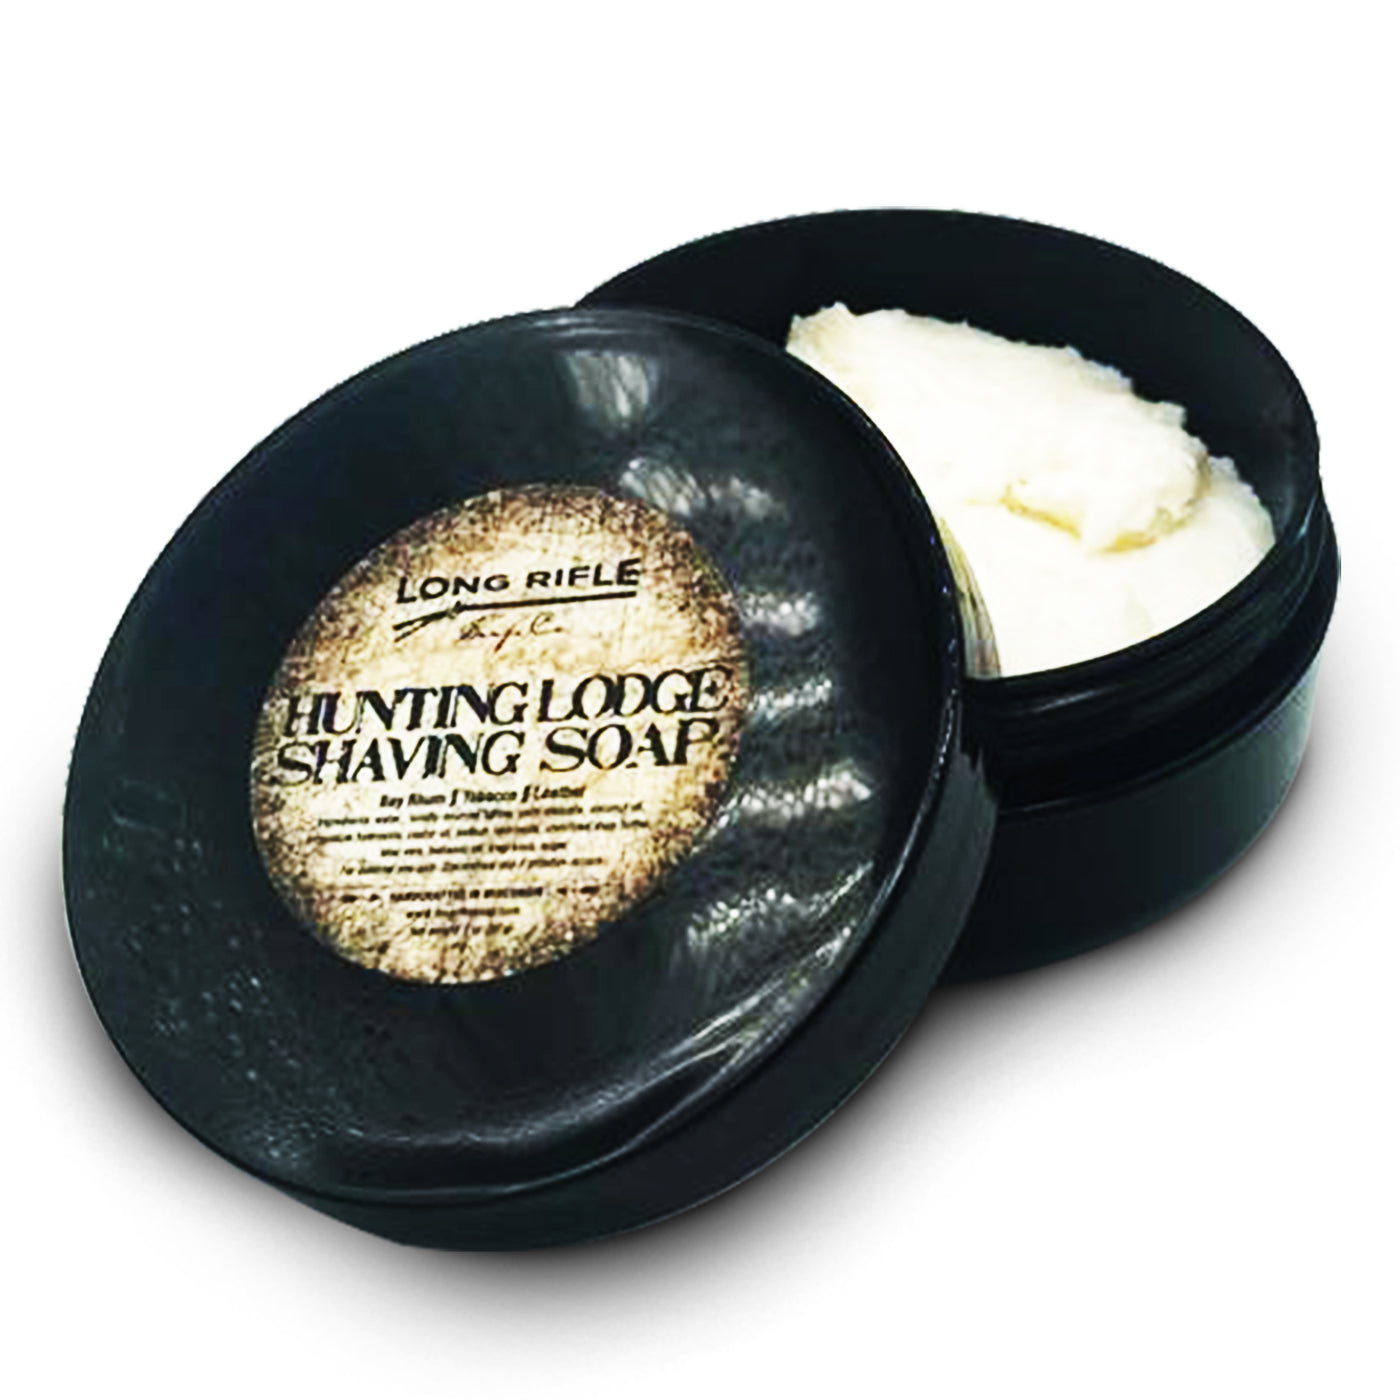  Hunting Lodge Shaving Soap by Long Rifle sold by Naked Armor Razors